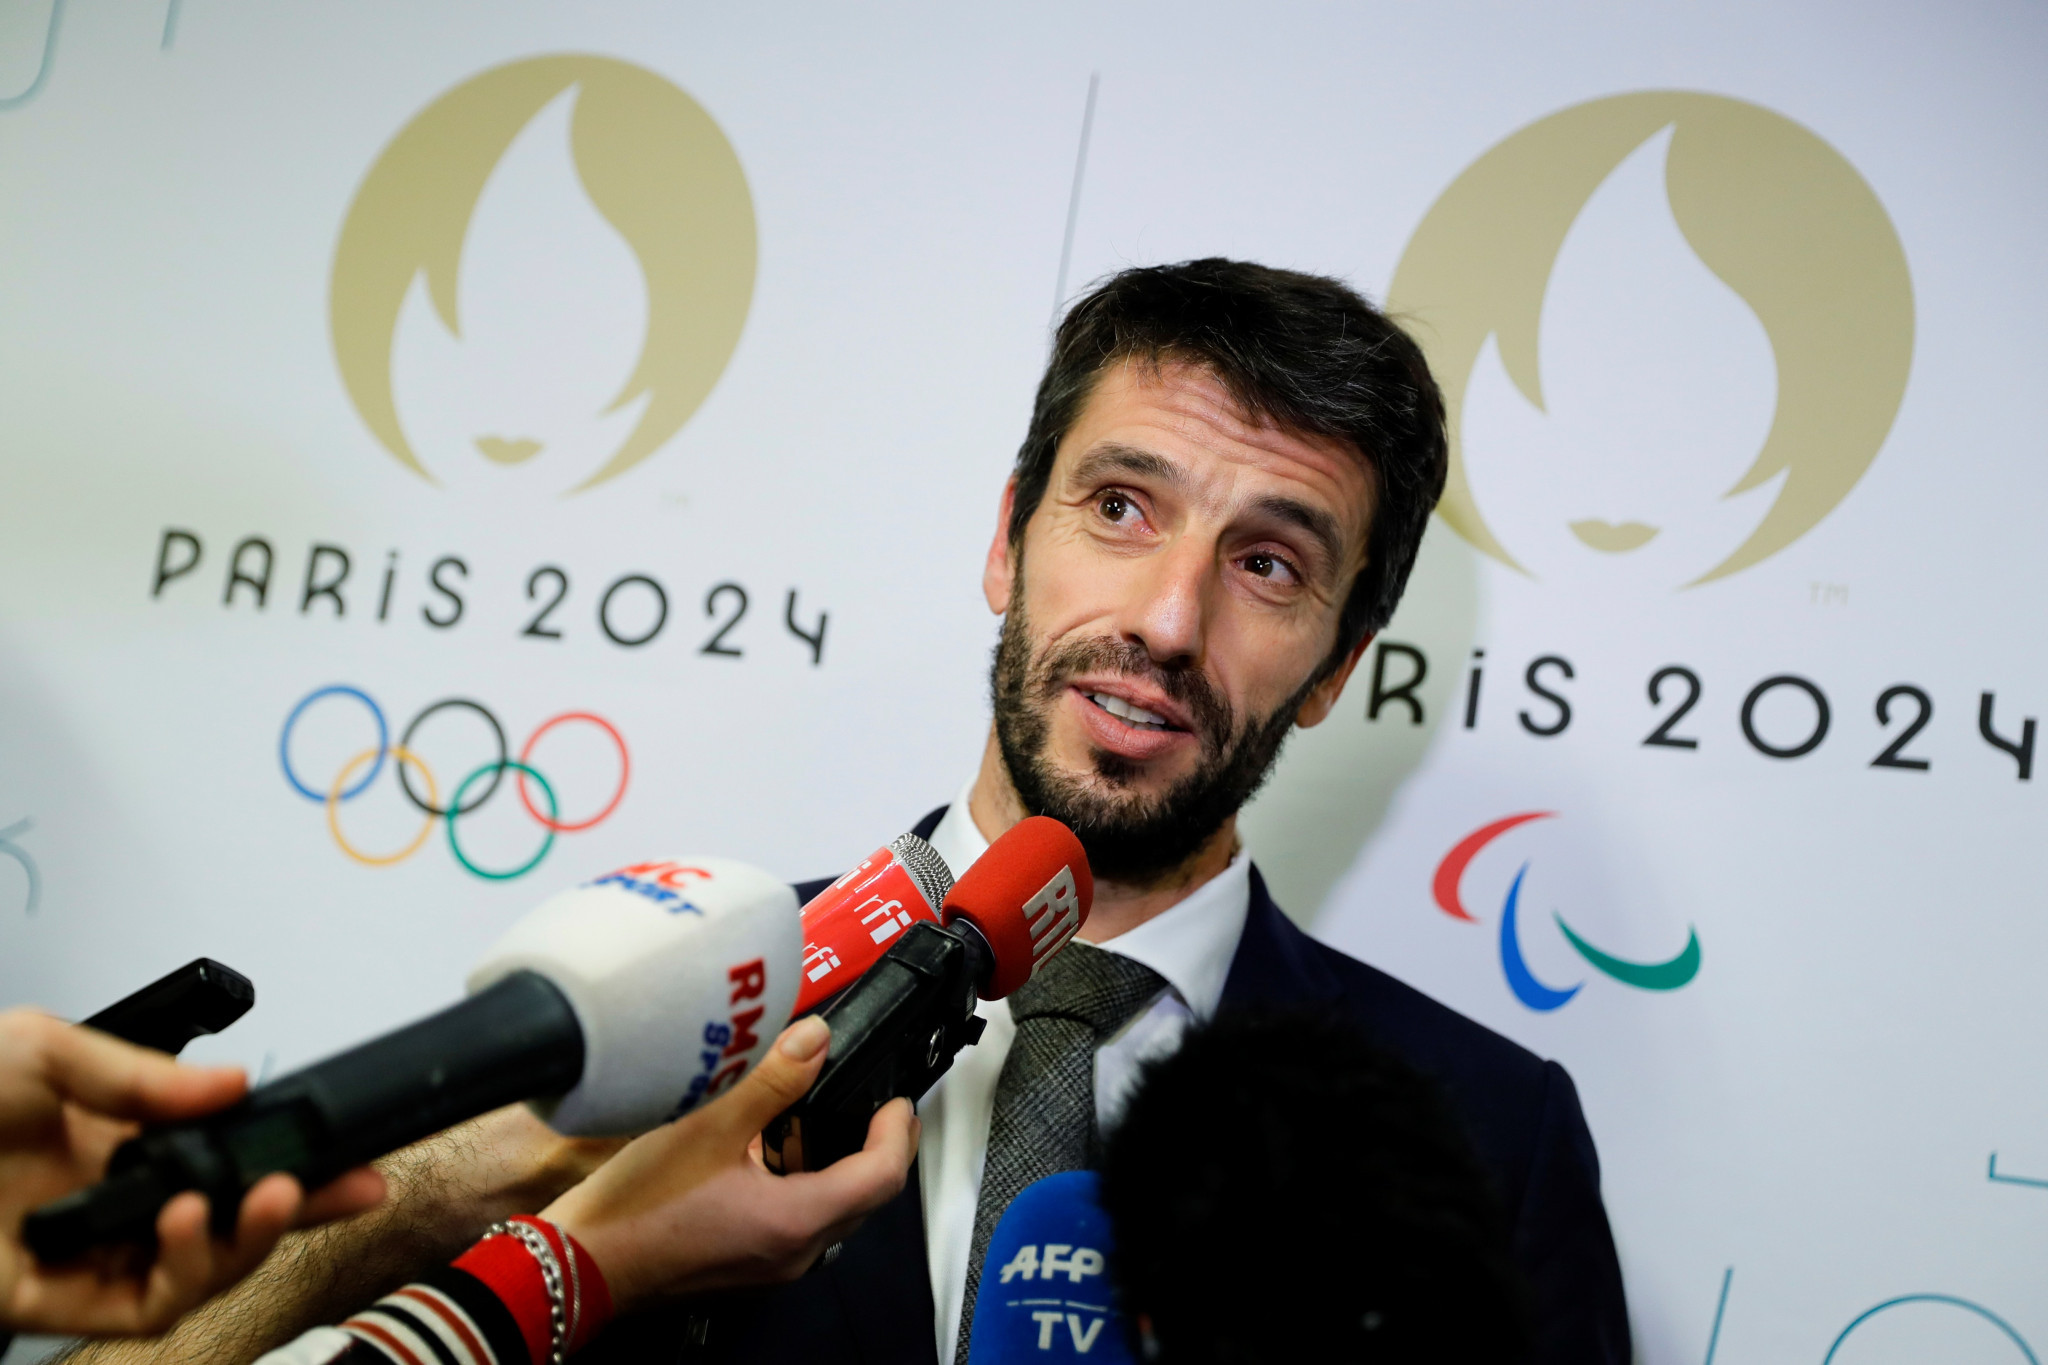 Paris 2024 President Tony Estanguet claimed the agreement with ANS showed the 